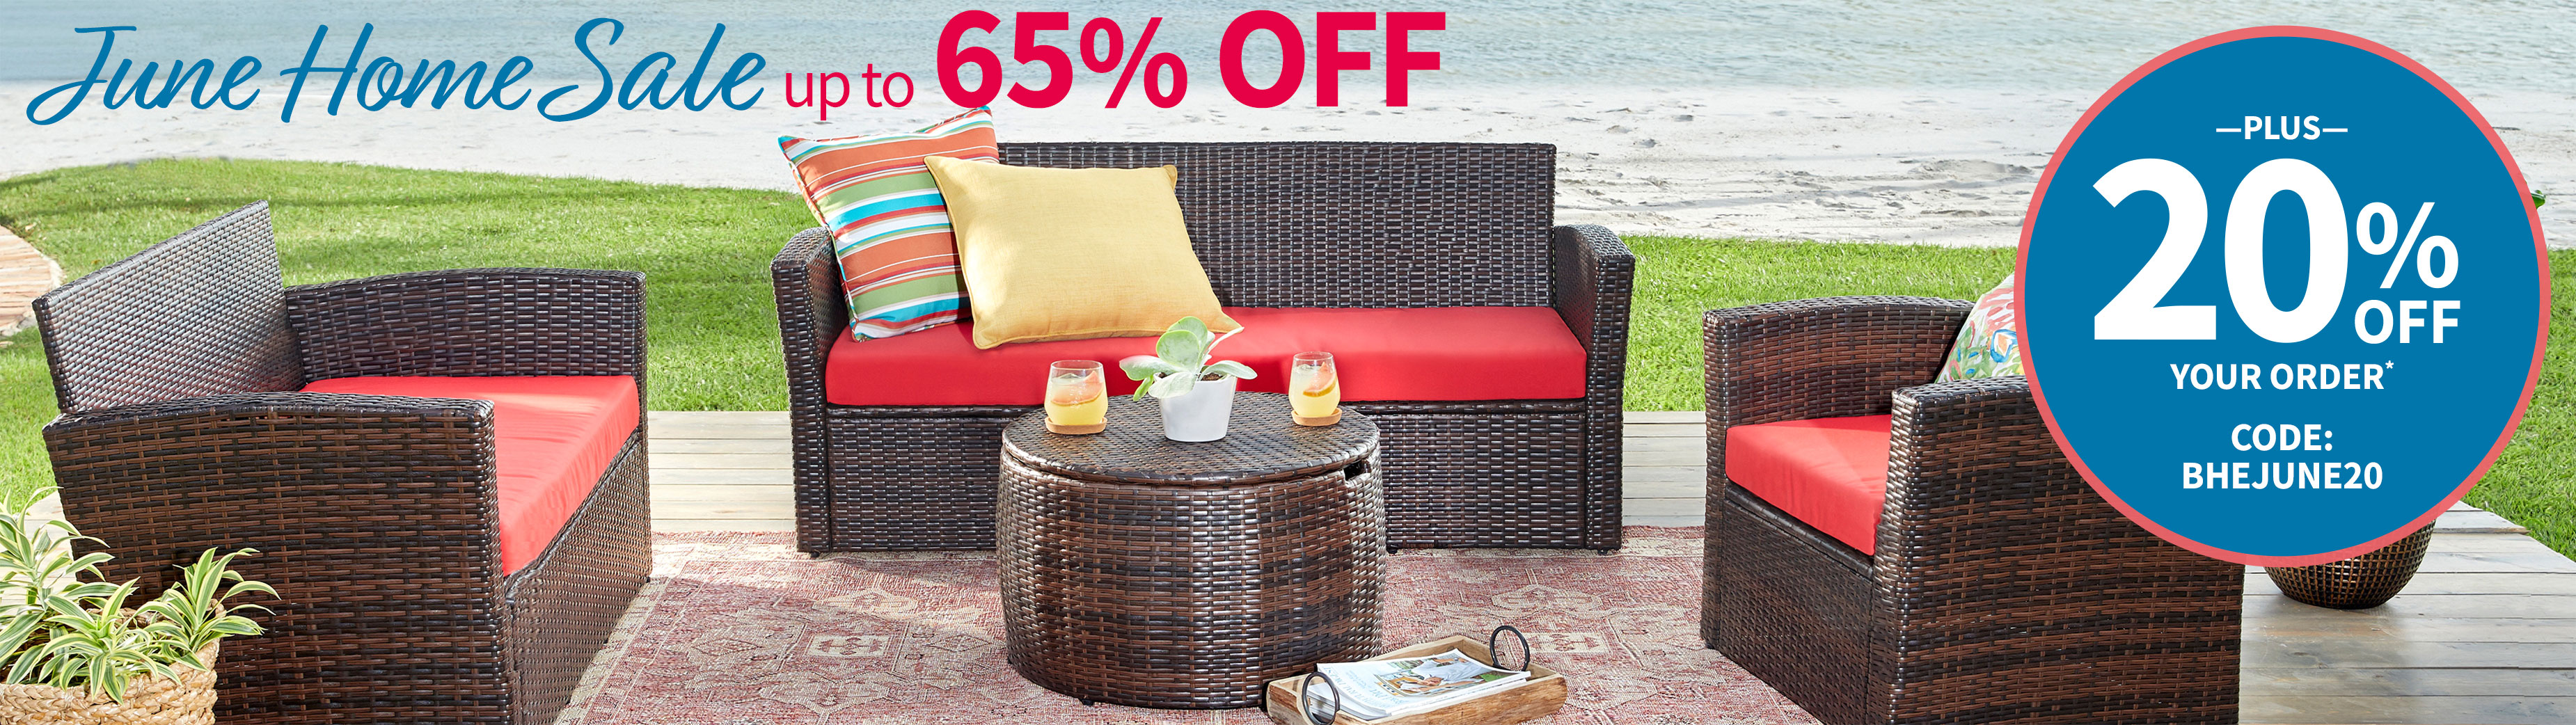 Summer Living Sitewide Sale 60% off Your Order* with code BHESW60 auto-applied at checkout.